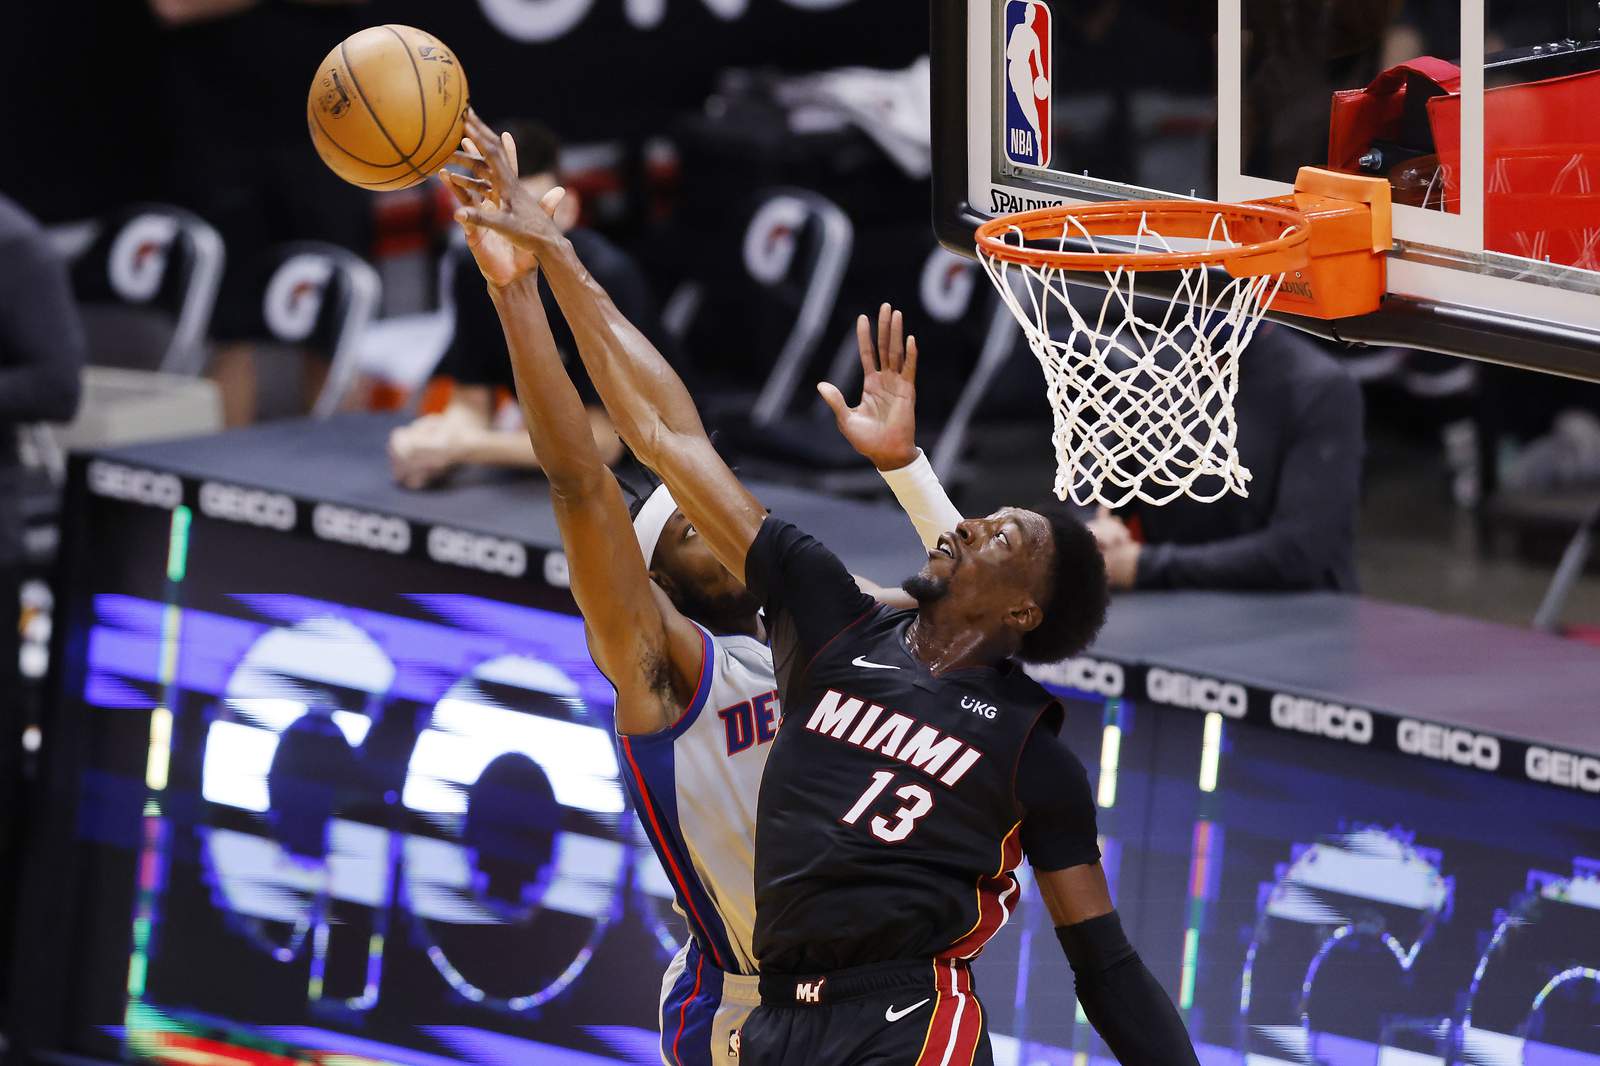 Heat rally from 19 down, top Pistons 113-107 to end slide